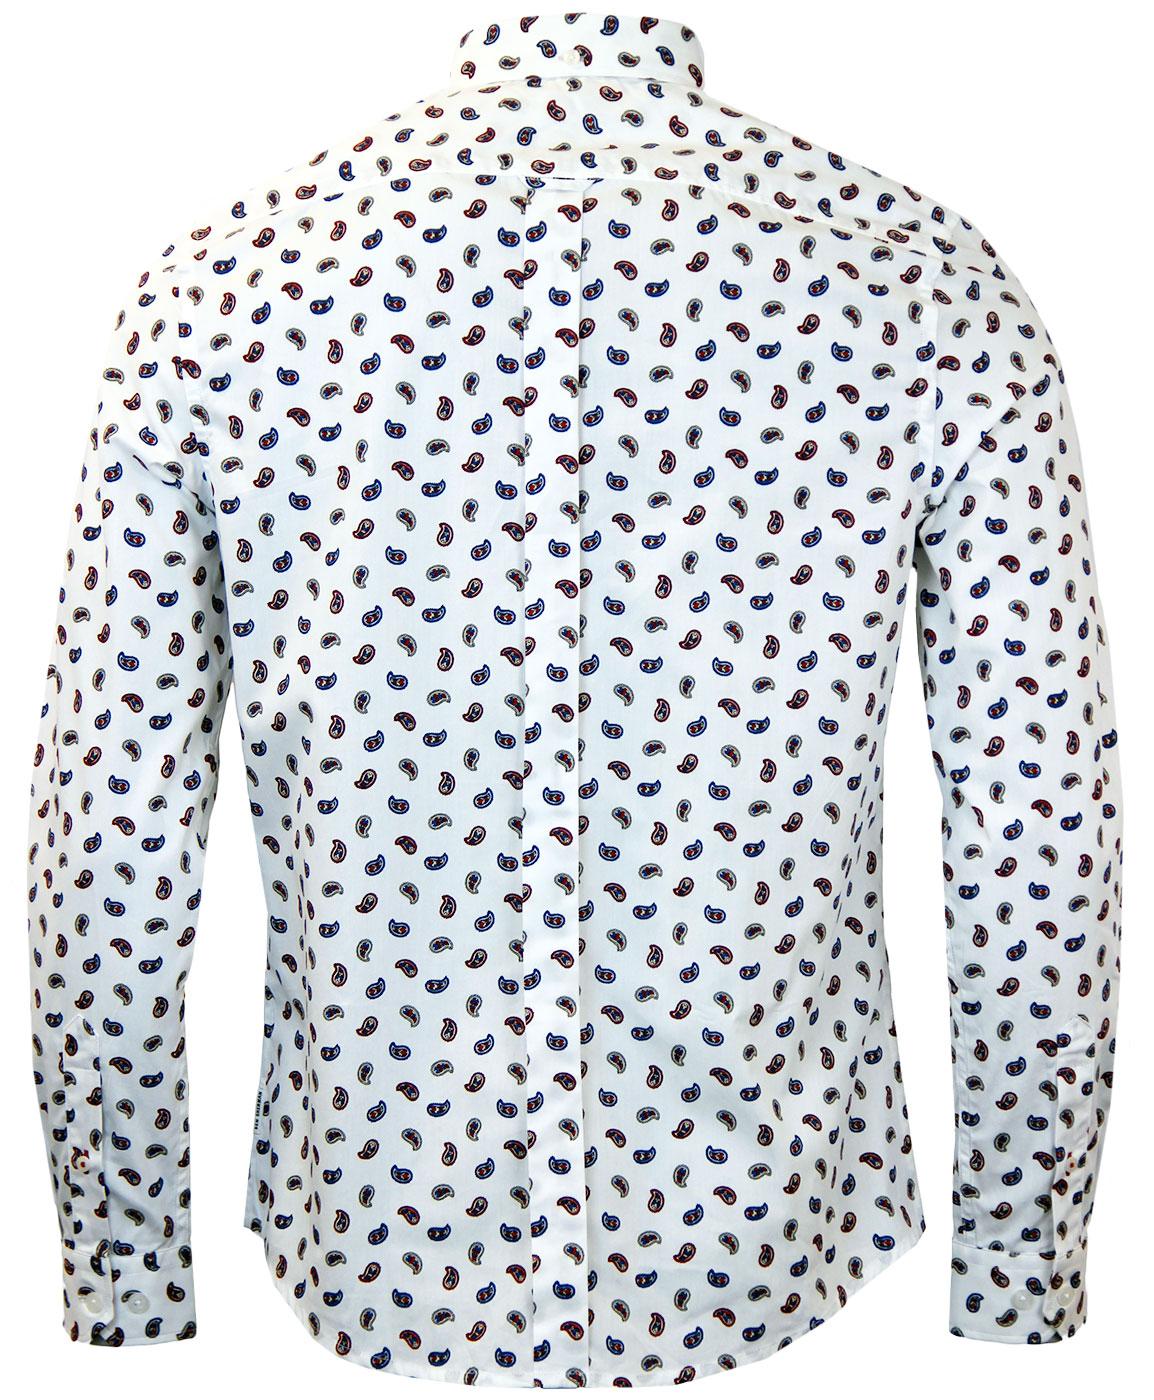 BEN SHERMAN Retro 60s Mod Scattered Paisley Psychedelic Shirt